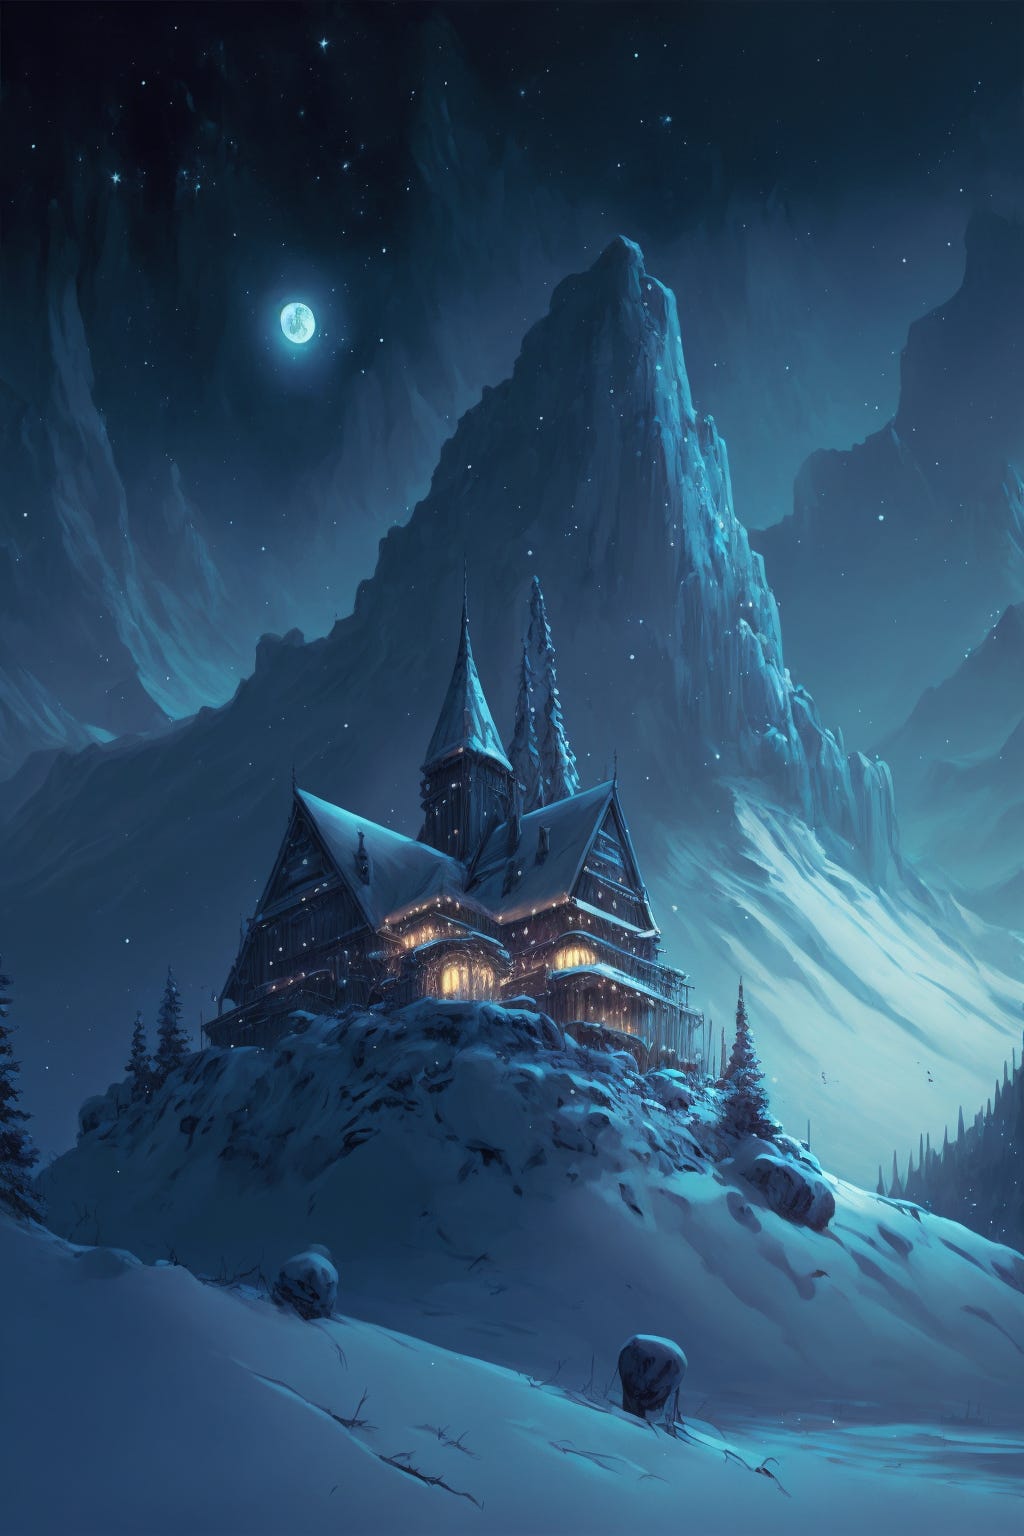 Illustration of a santas palace on a mountain in a dreamlike snow paradise, bright starry night sky, by Noah Bradley